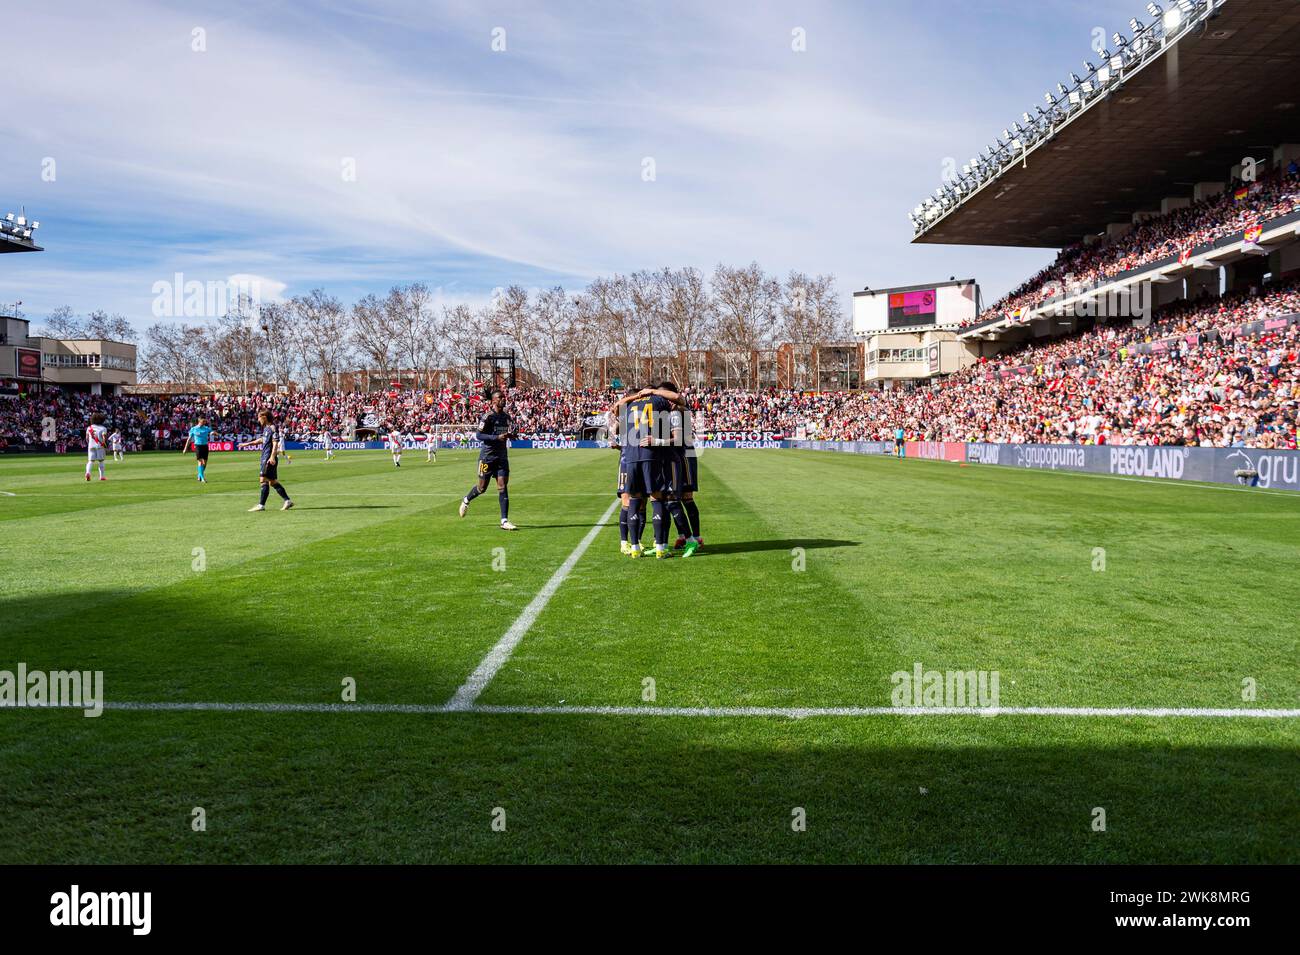 Jose Luis Sanmartin Mato (Joselu) (C) of Real Madrid celebrates a goal with his teammates (from L to R) Lucas Vazquez, Vinicius Junior, Fran Garcia and Nacho Fernandez during the La Liga EA Sports 2023/24 football match between Rayo Vallecano and Real Madrid at Estadio Vallecas. Rayo Vallecano 1 : 1 Real Madrid (Photo by Alberto Gardin / SOPA Images/Sipa USA) Stock Photo